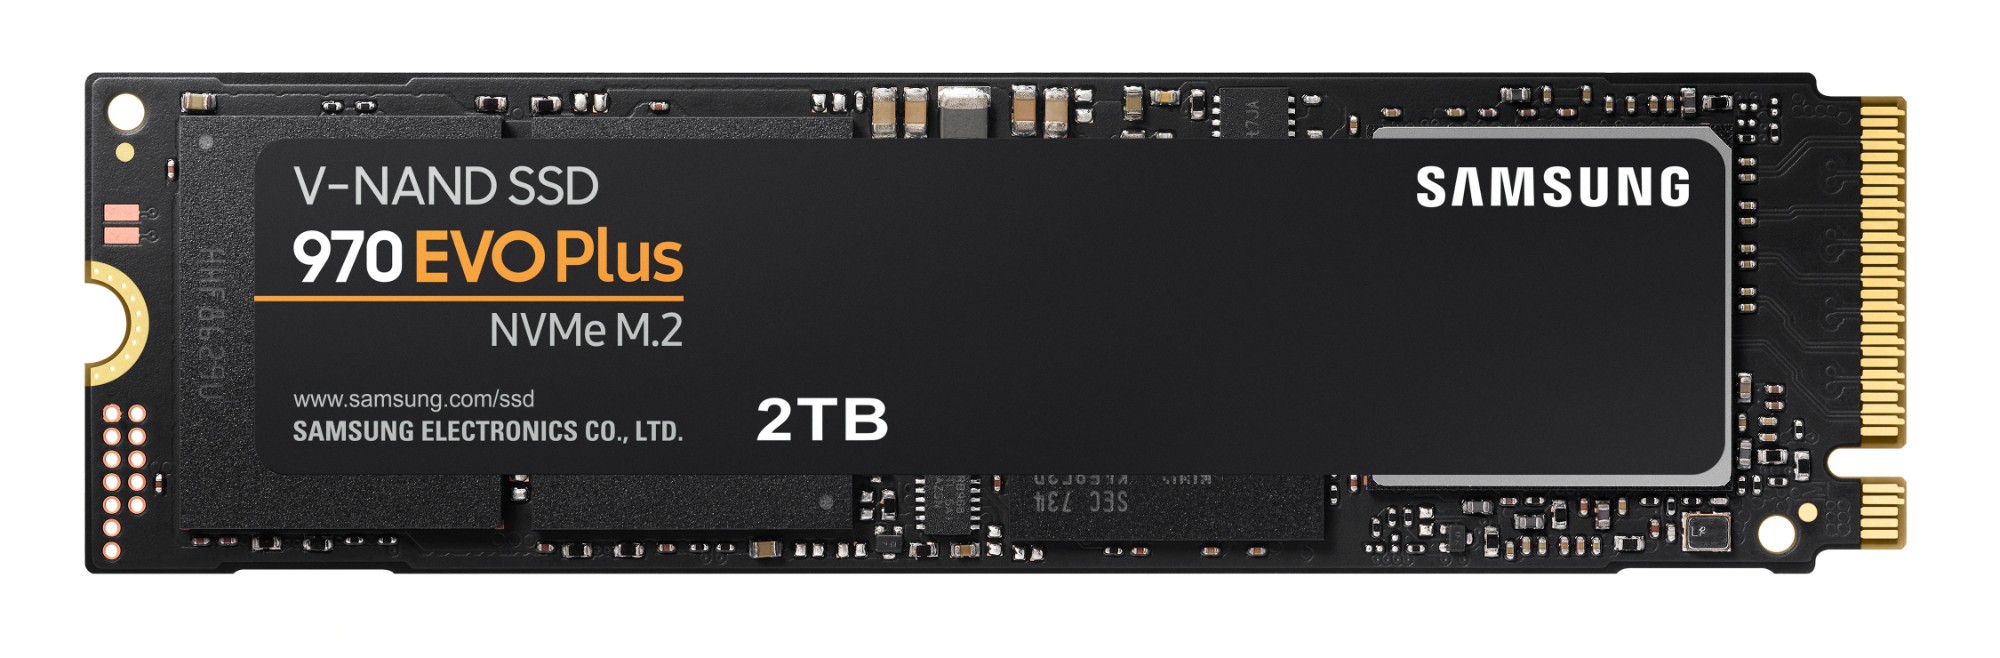 SAMSUNG 970 EVO Plus SSD 2TB - M.2 NVMe Interface Internal Solid State  Drive with V-NAND Technology (MZ-V7S2T0B/AM)